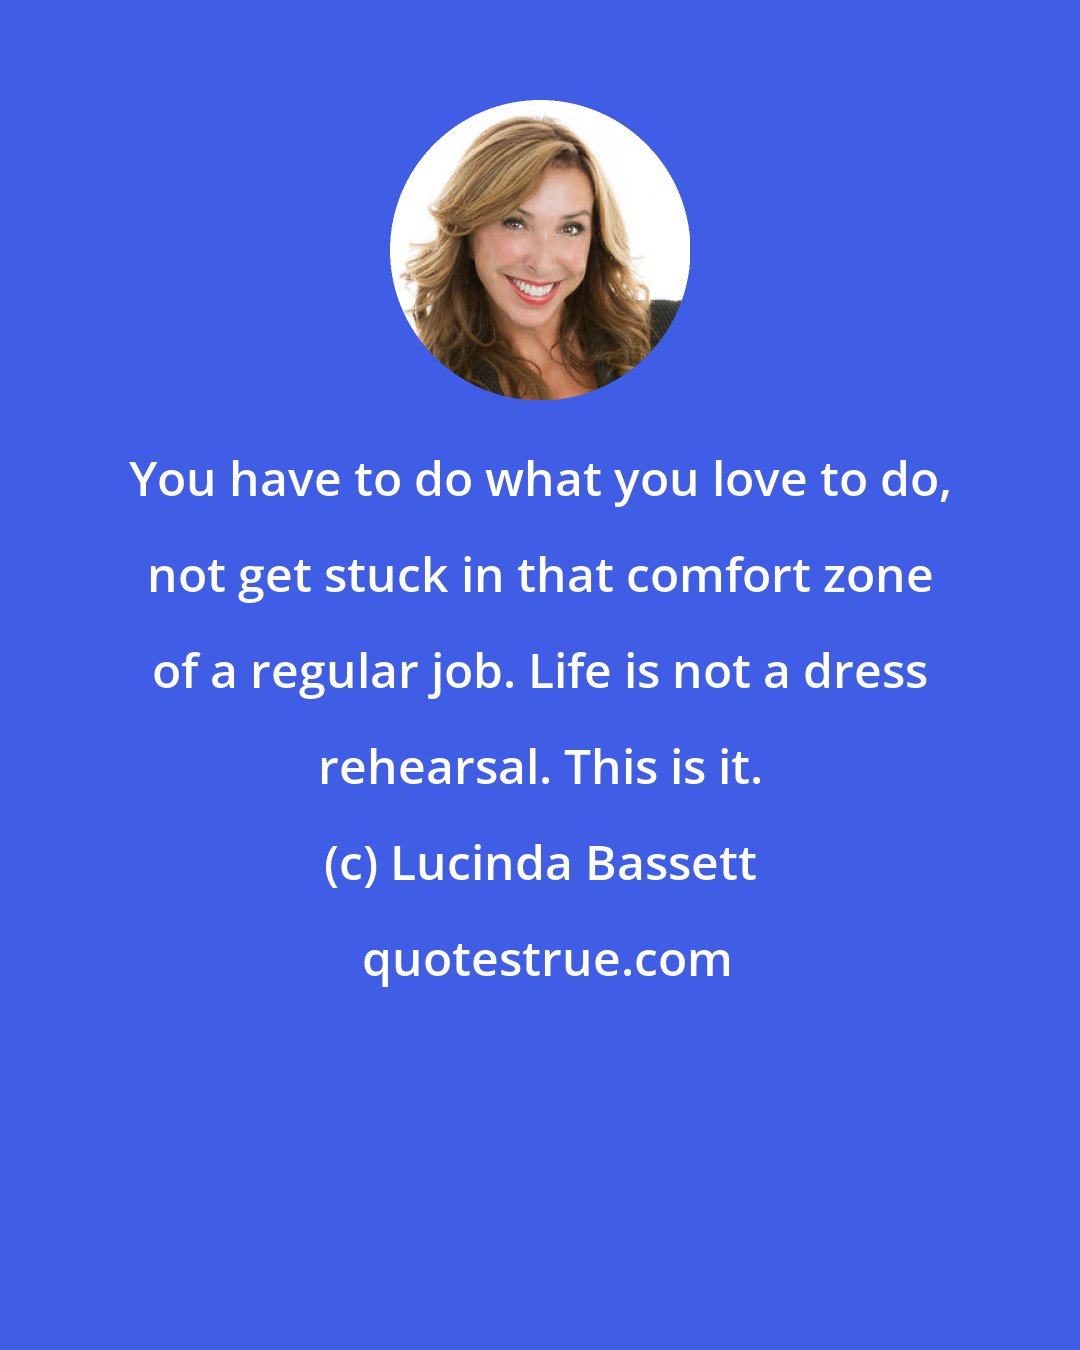 Lucinda Bassett: You have to do what you love to do, not get stuck in that comfort zone of a regular job. Life is not a dress rehearsal. This is it.